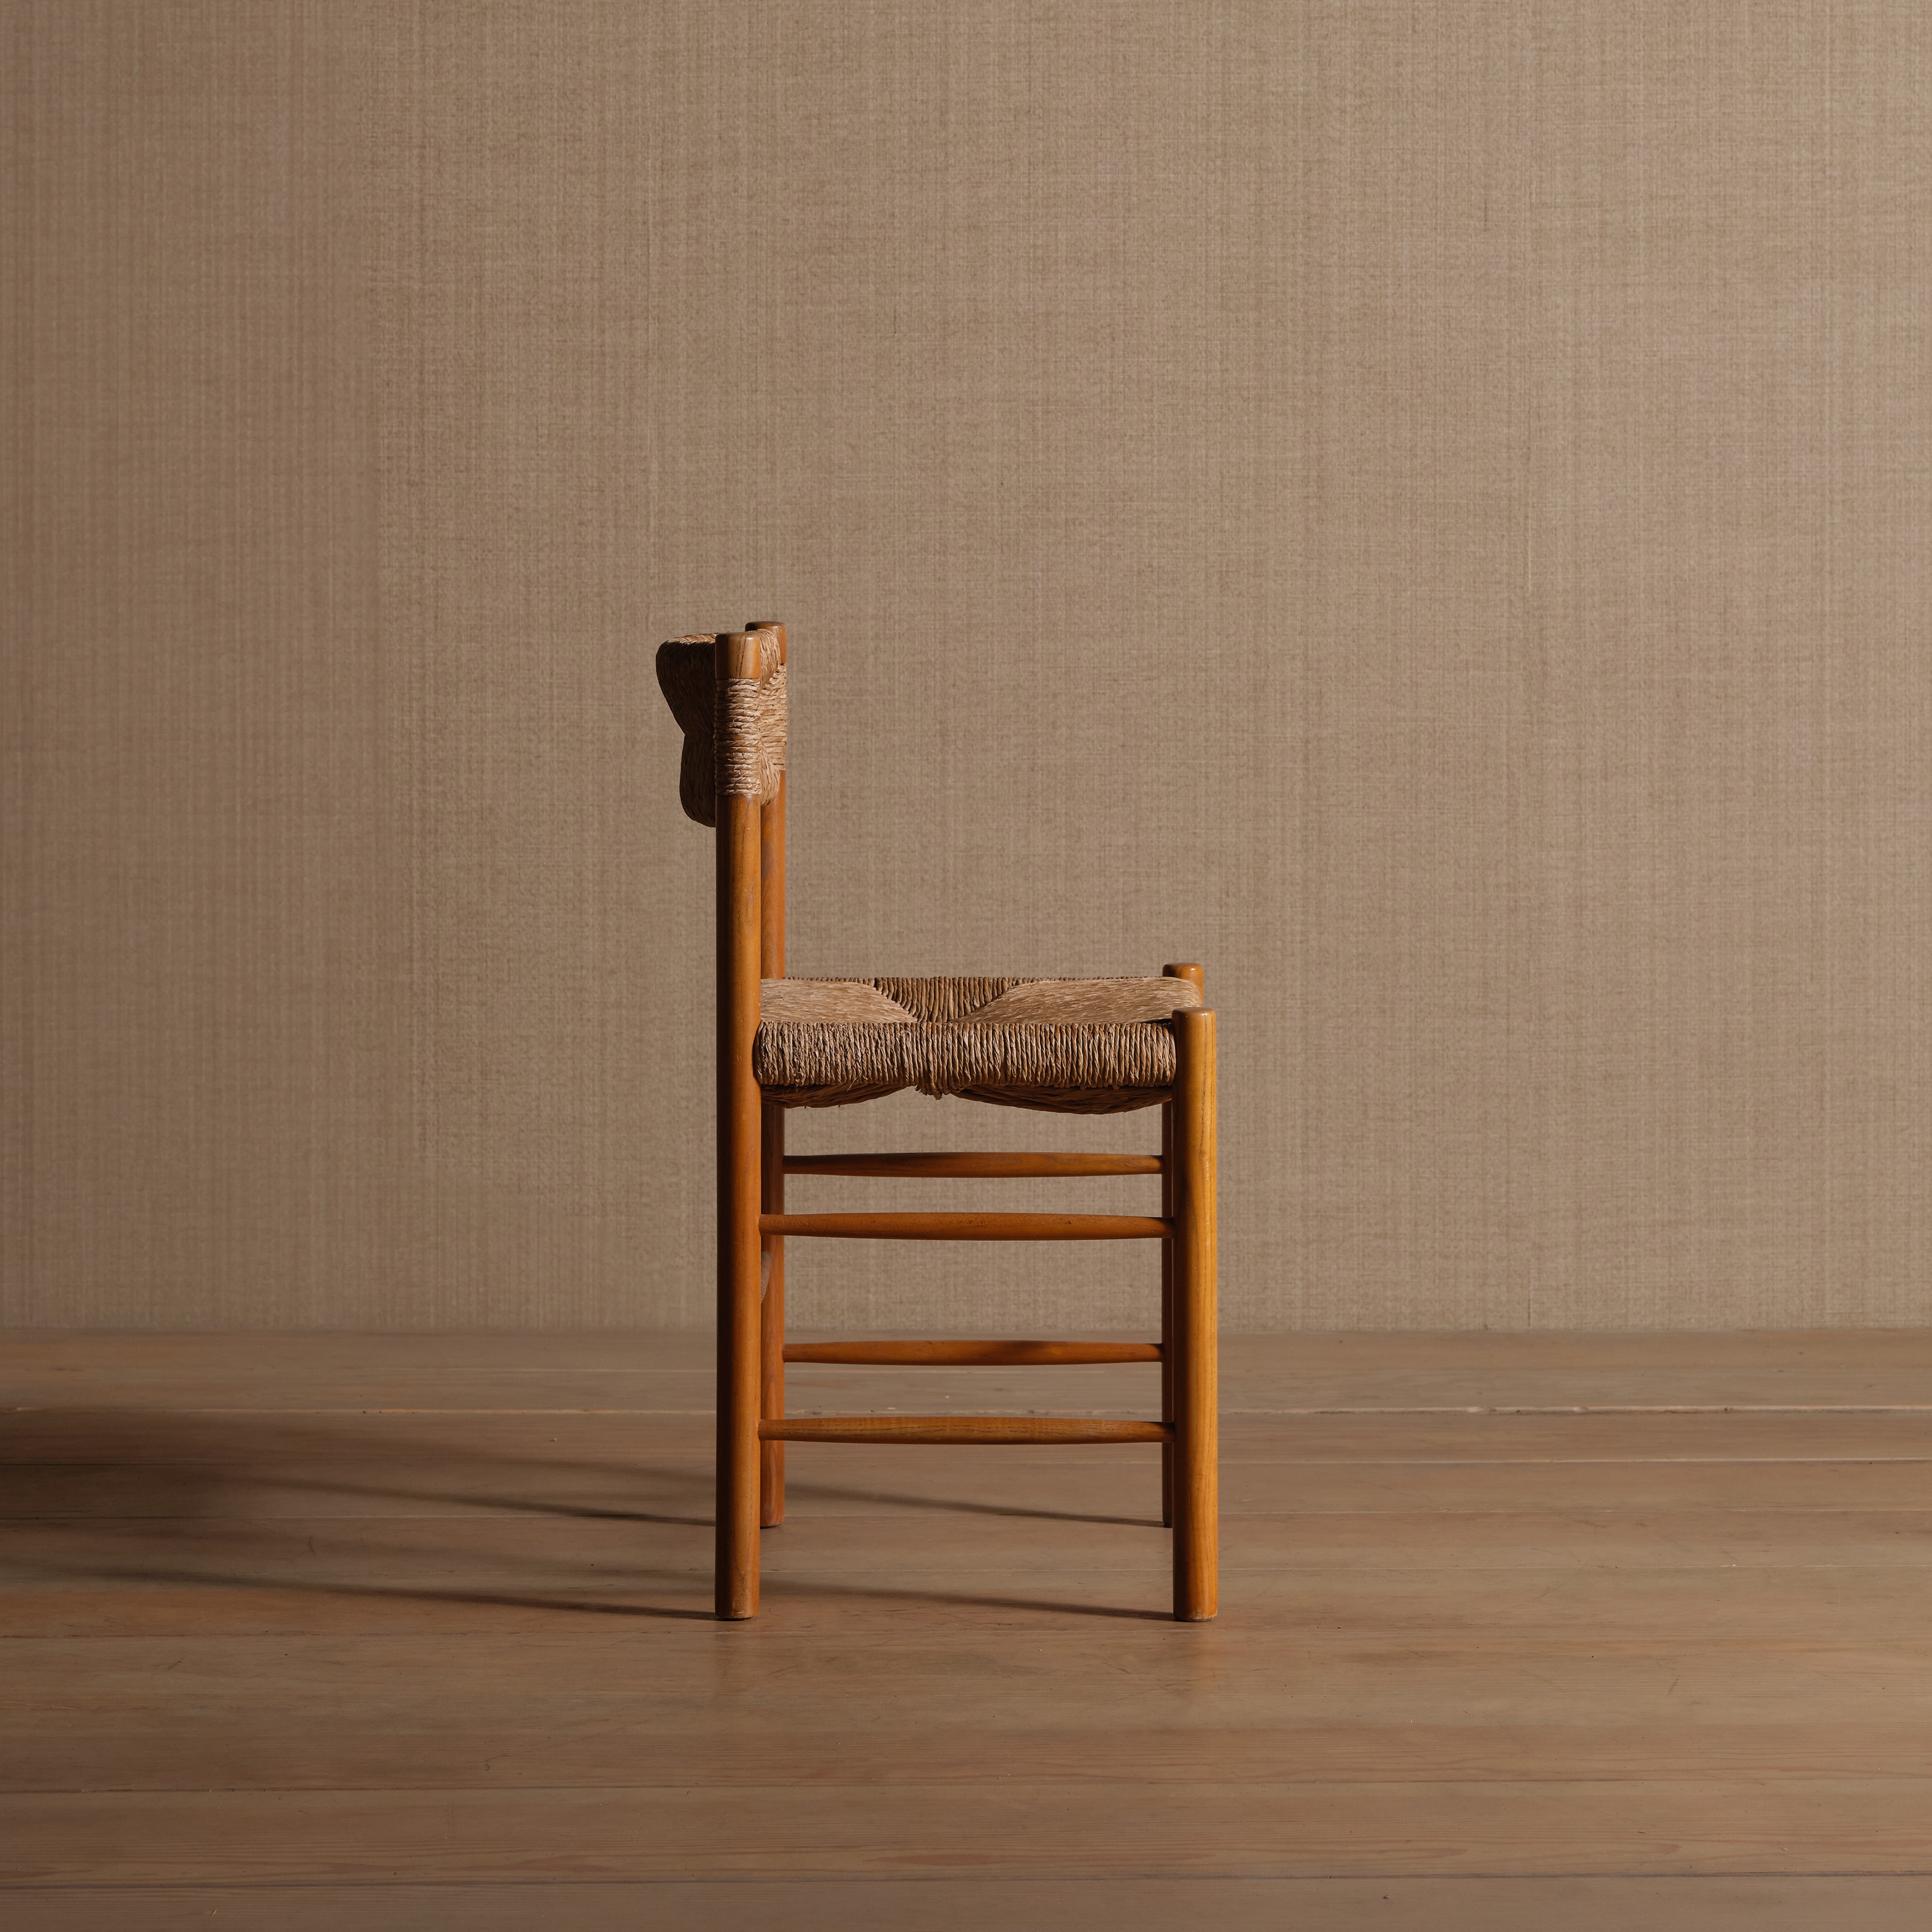 a wooden chair with a woven seat on a wooden floor